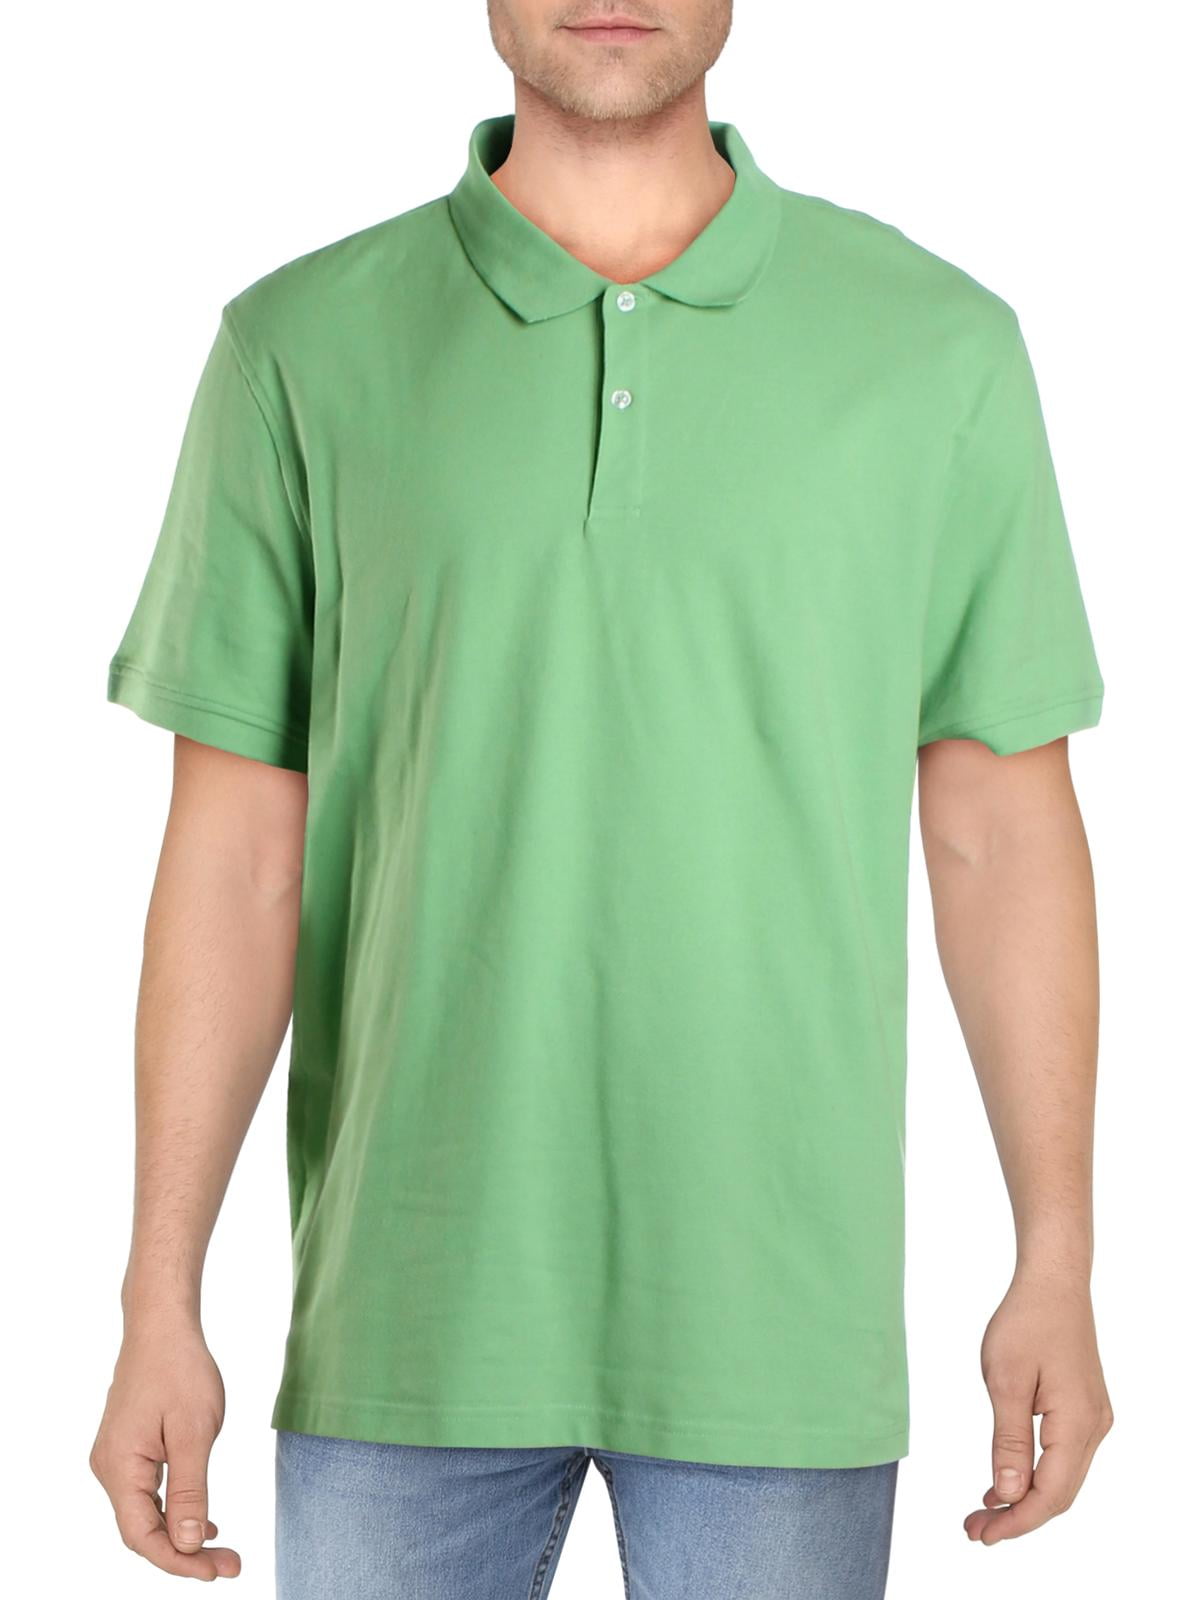 Club Room Men's Classic Fit Performance Polo